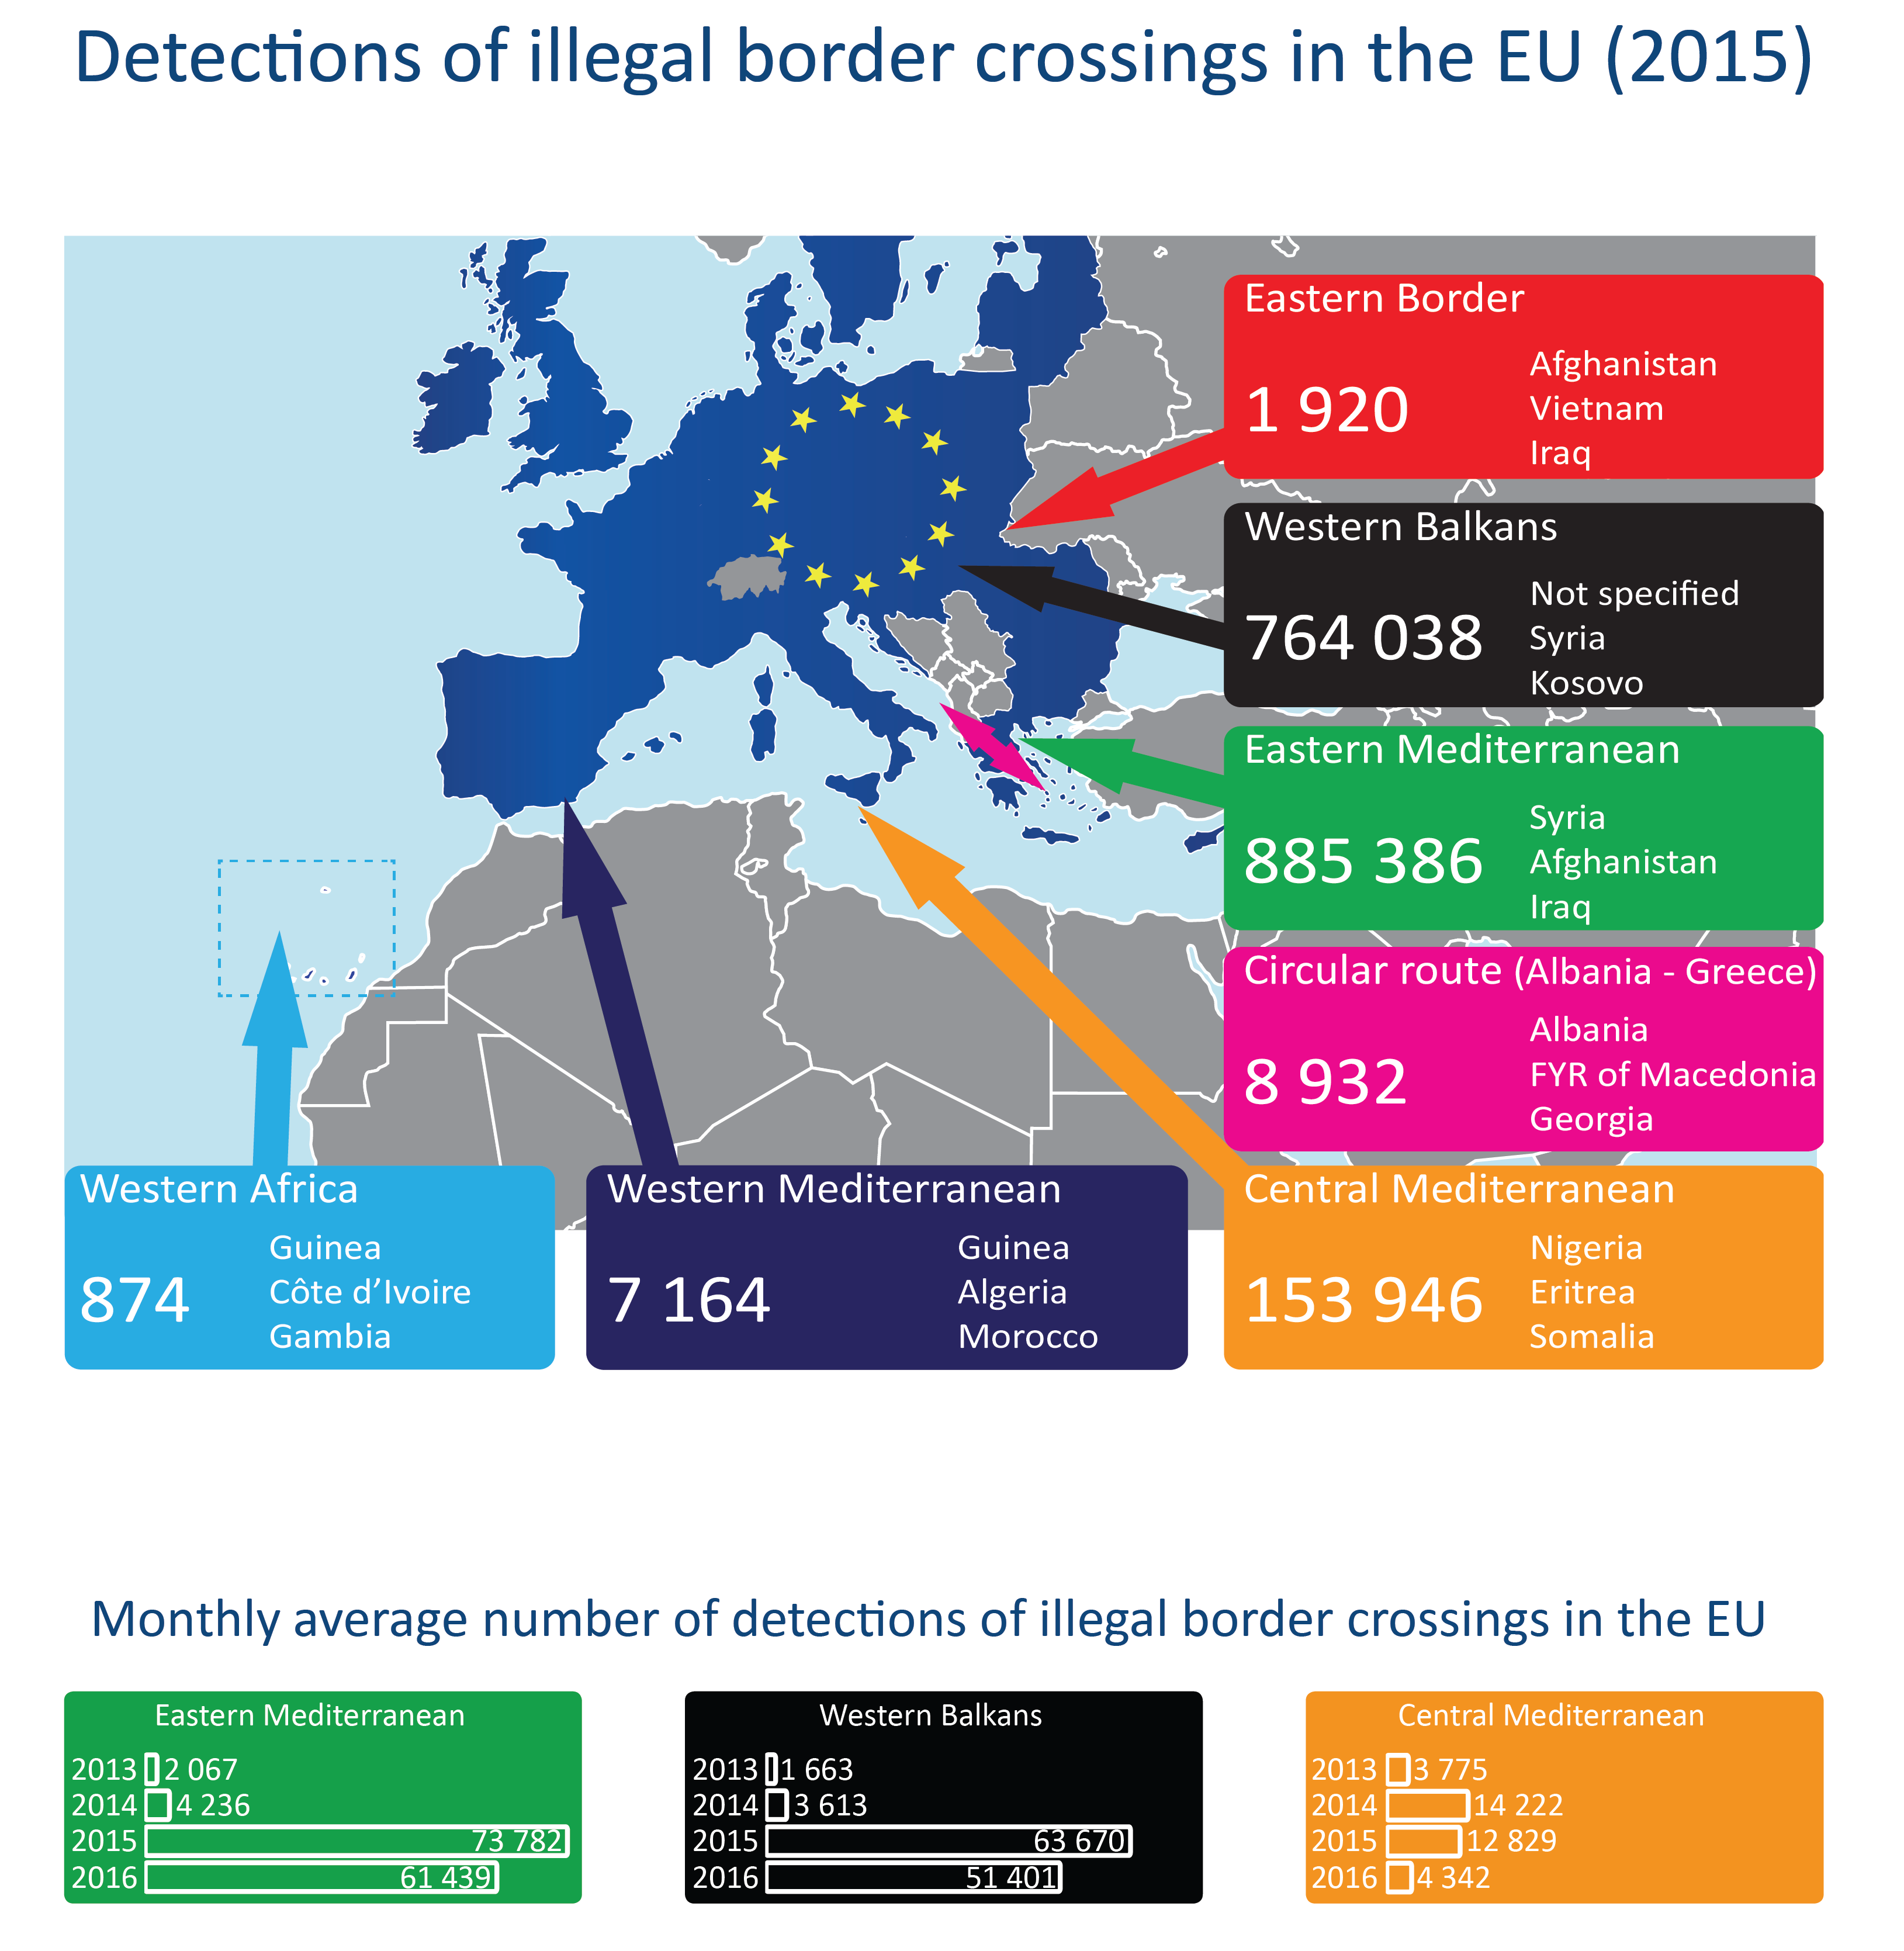 Detections of illegal border crossings in the EU (2015)